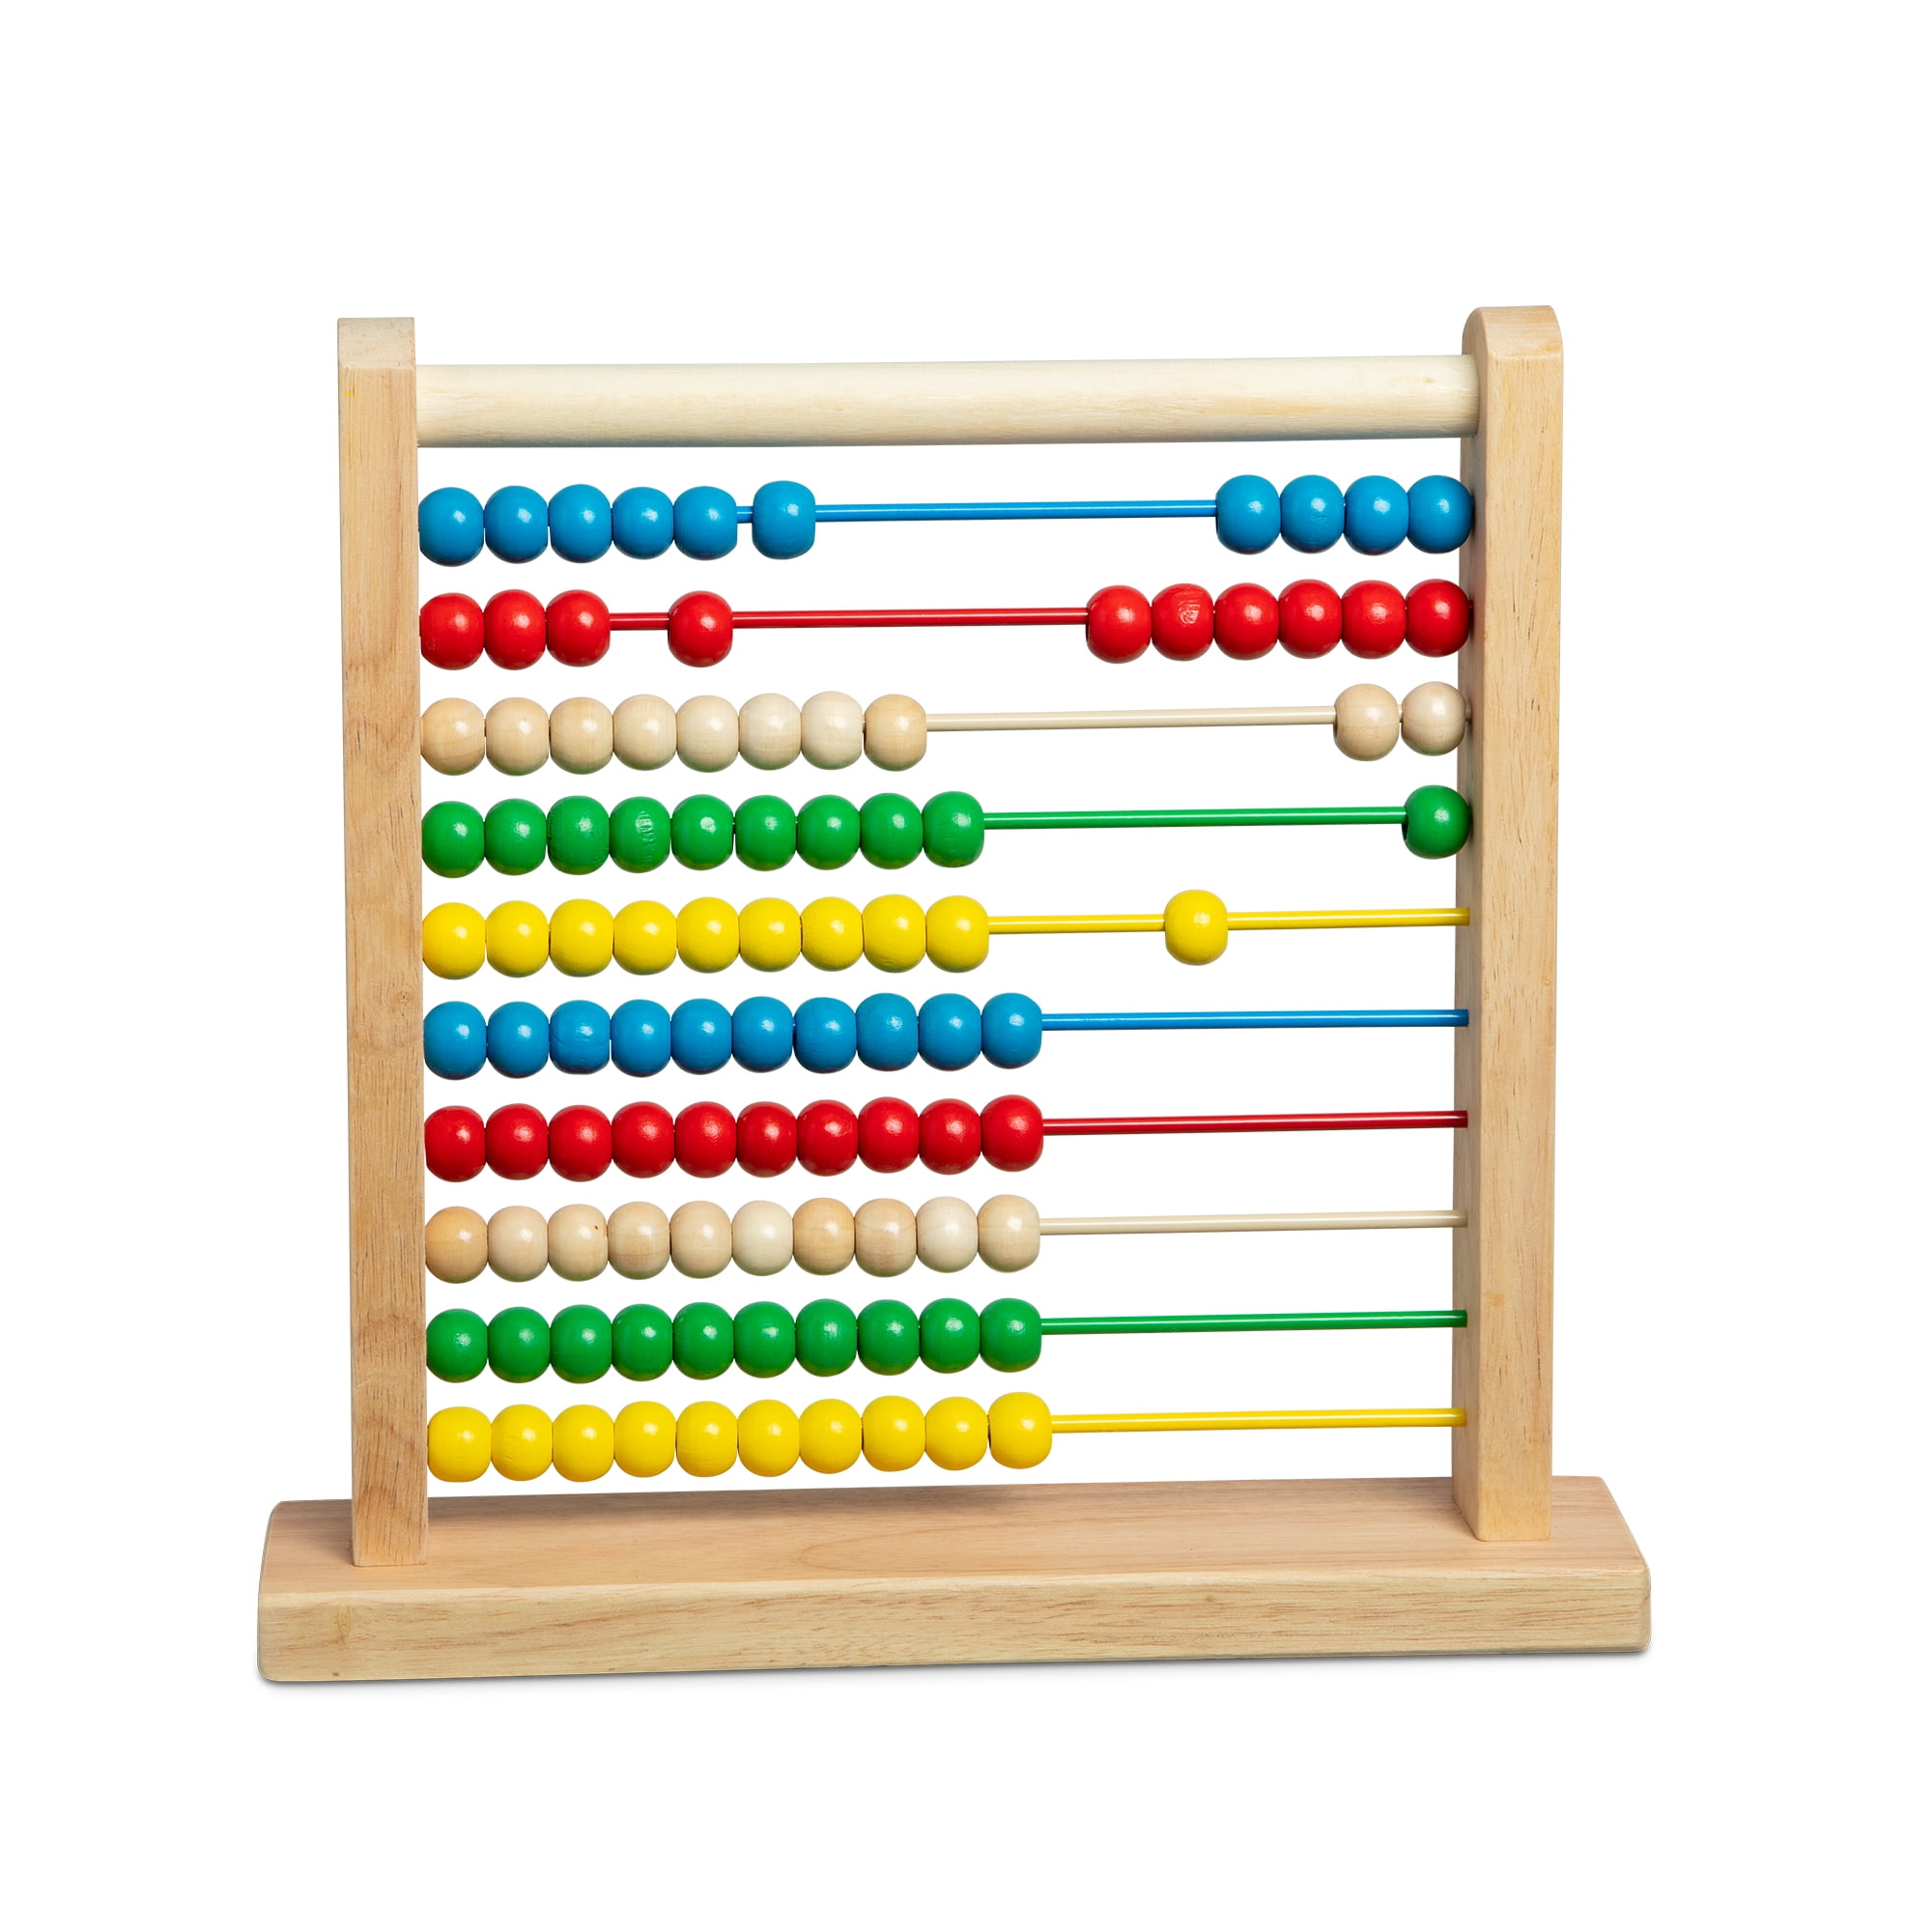 Classic Wooden Educational Counting Toy With 100 Beads Melissa Doug Abacus 